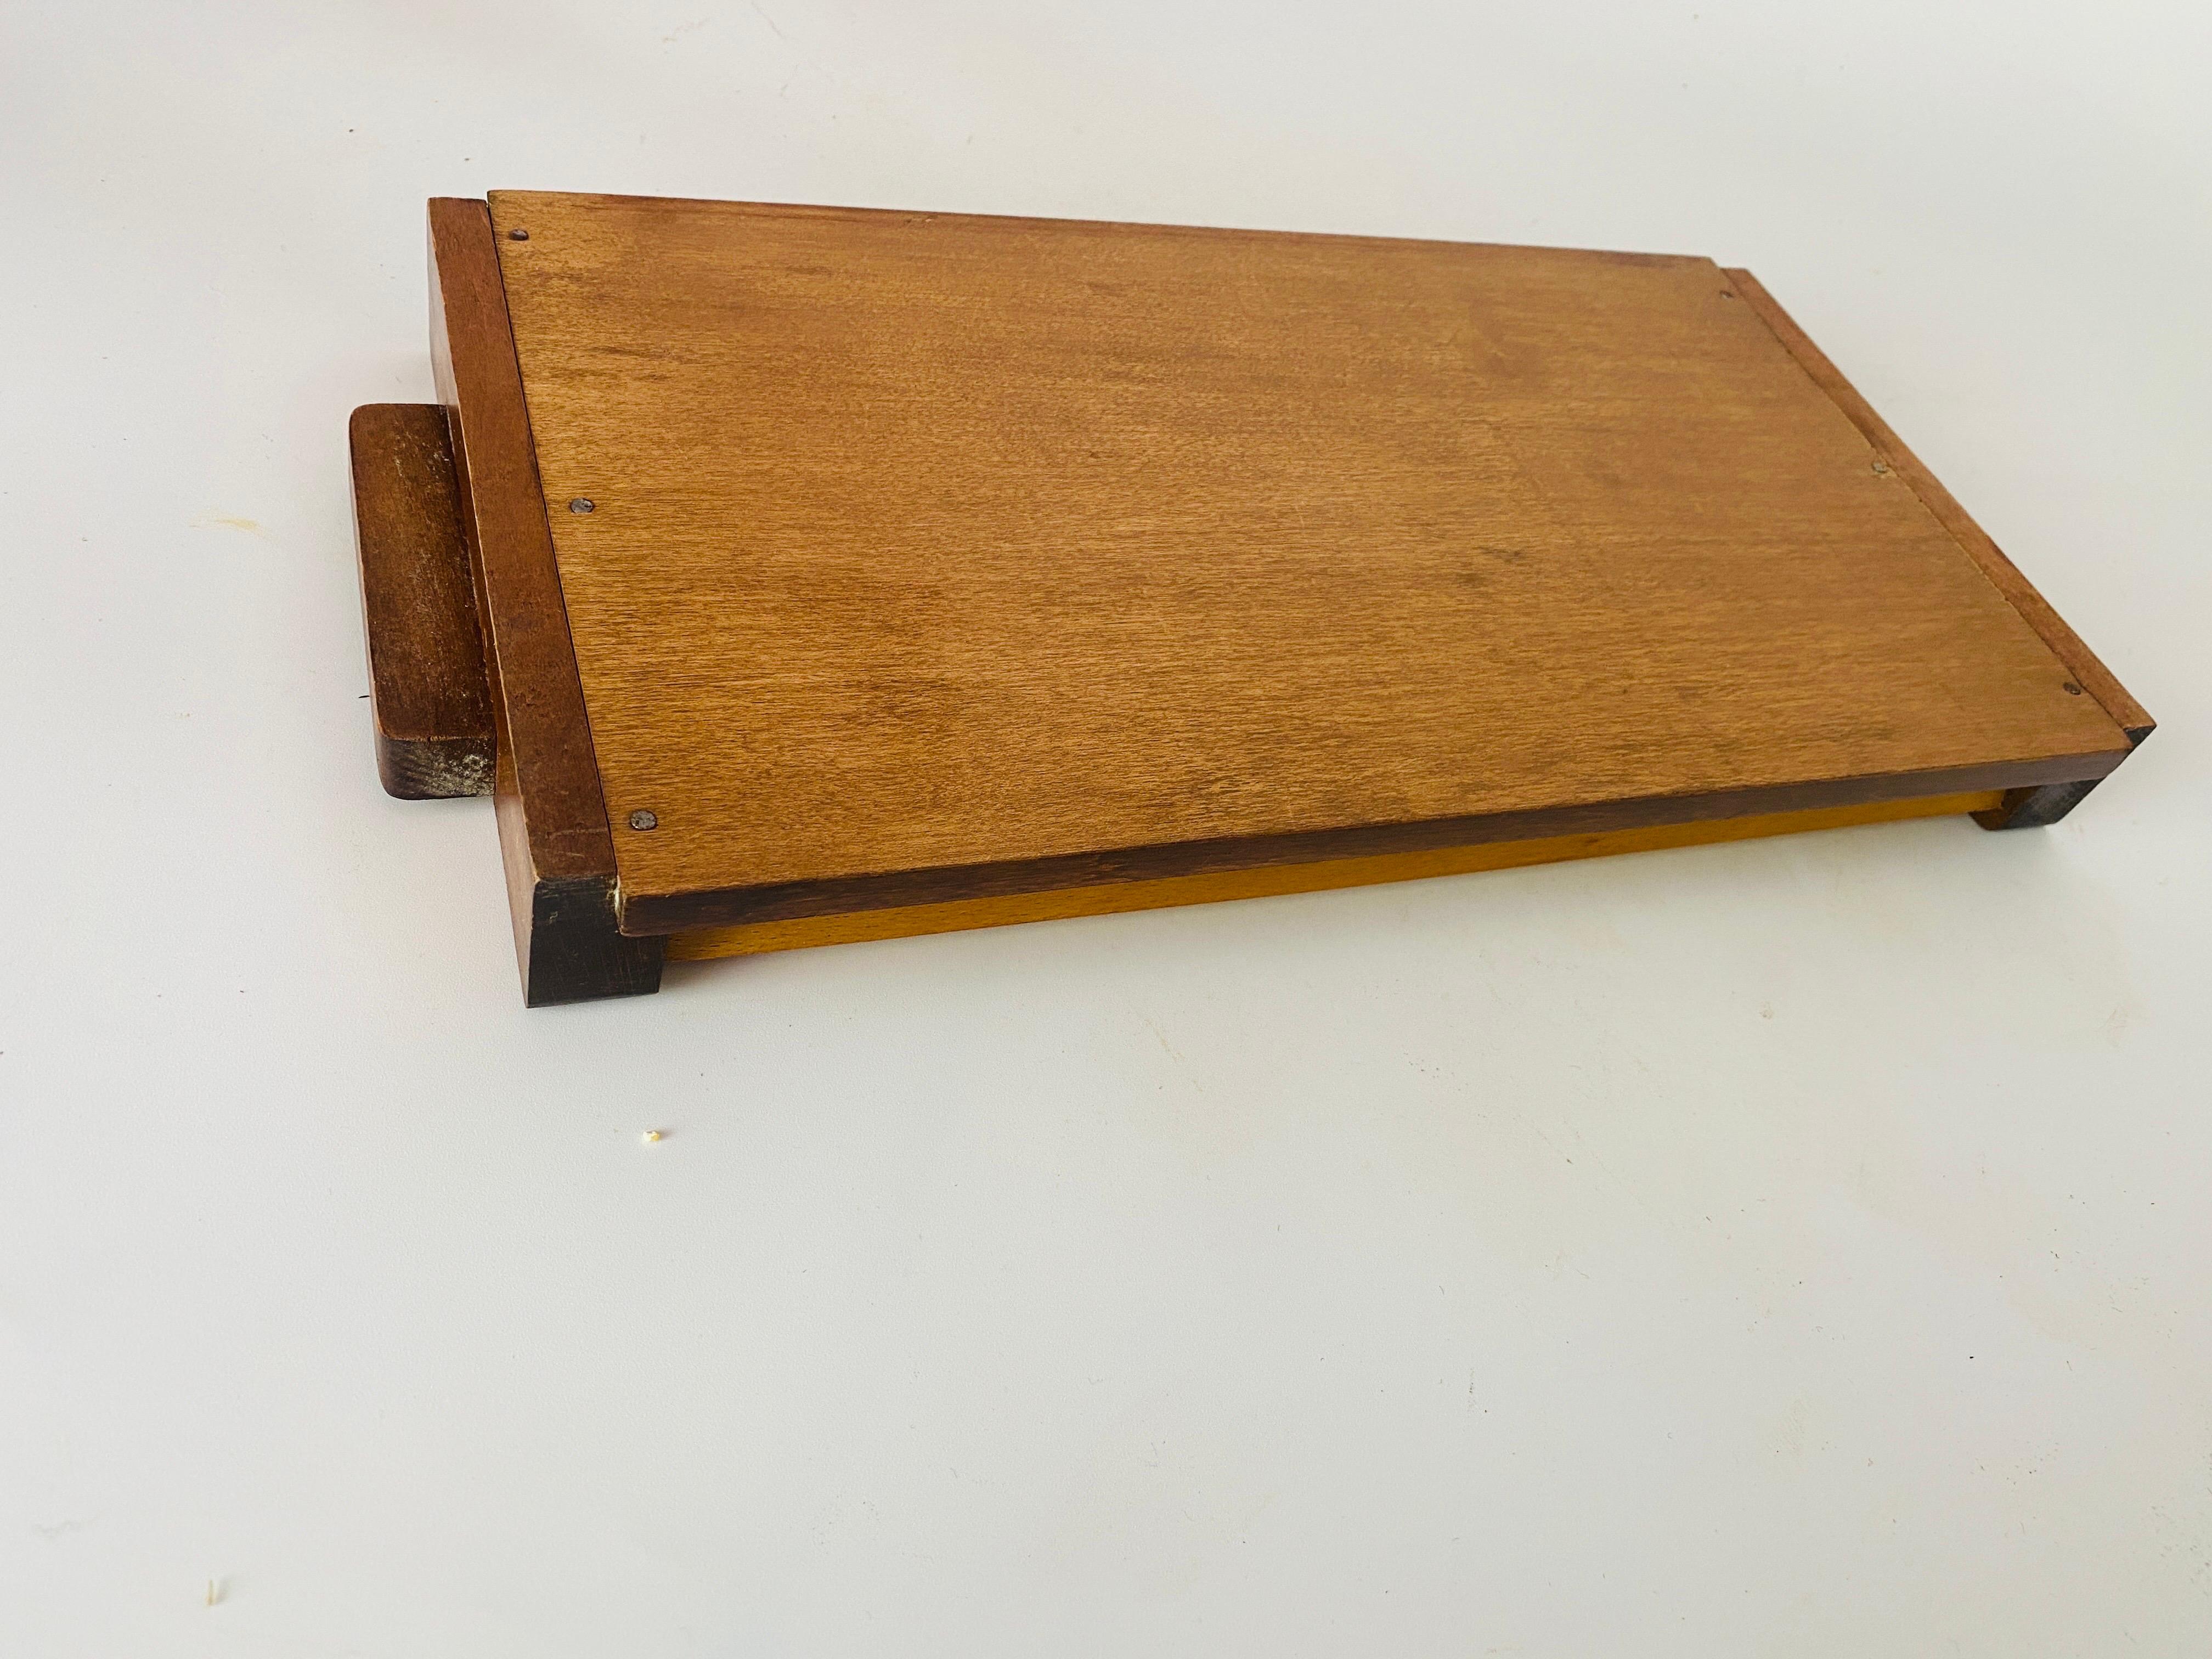 This tray is a tray from the Art-Deco period. It is in wood, , Its shape is rectangular, and ends with two wooden handles. Its color is Beige and Brown , it was made in the 1940s in France.